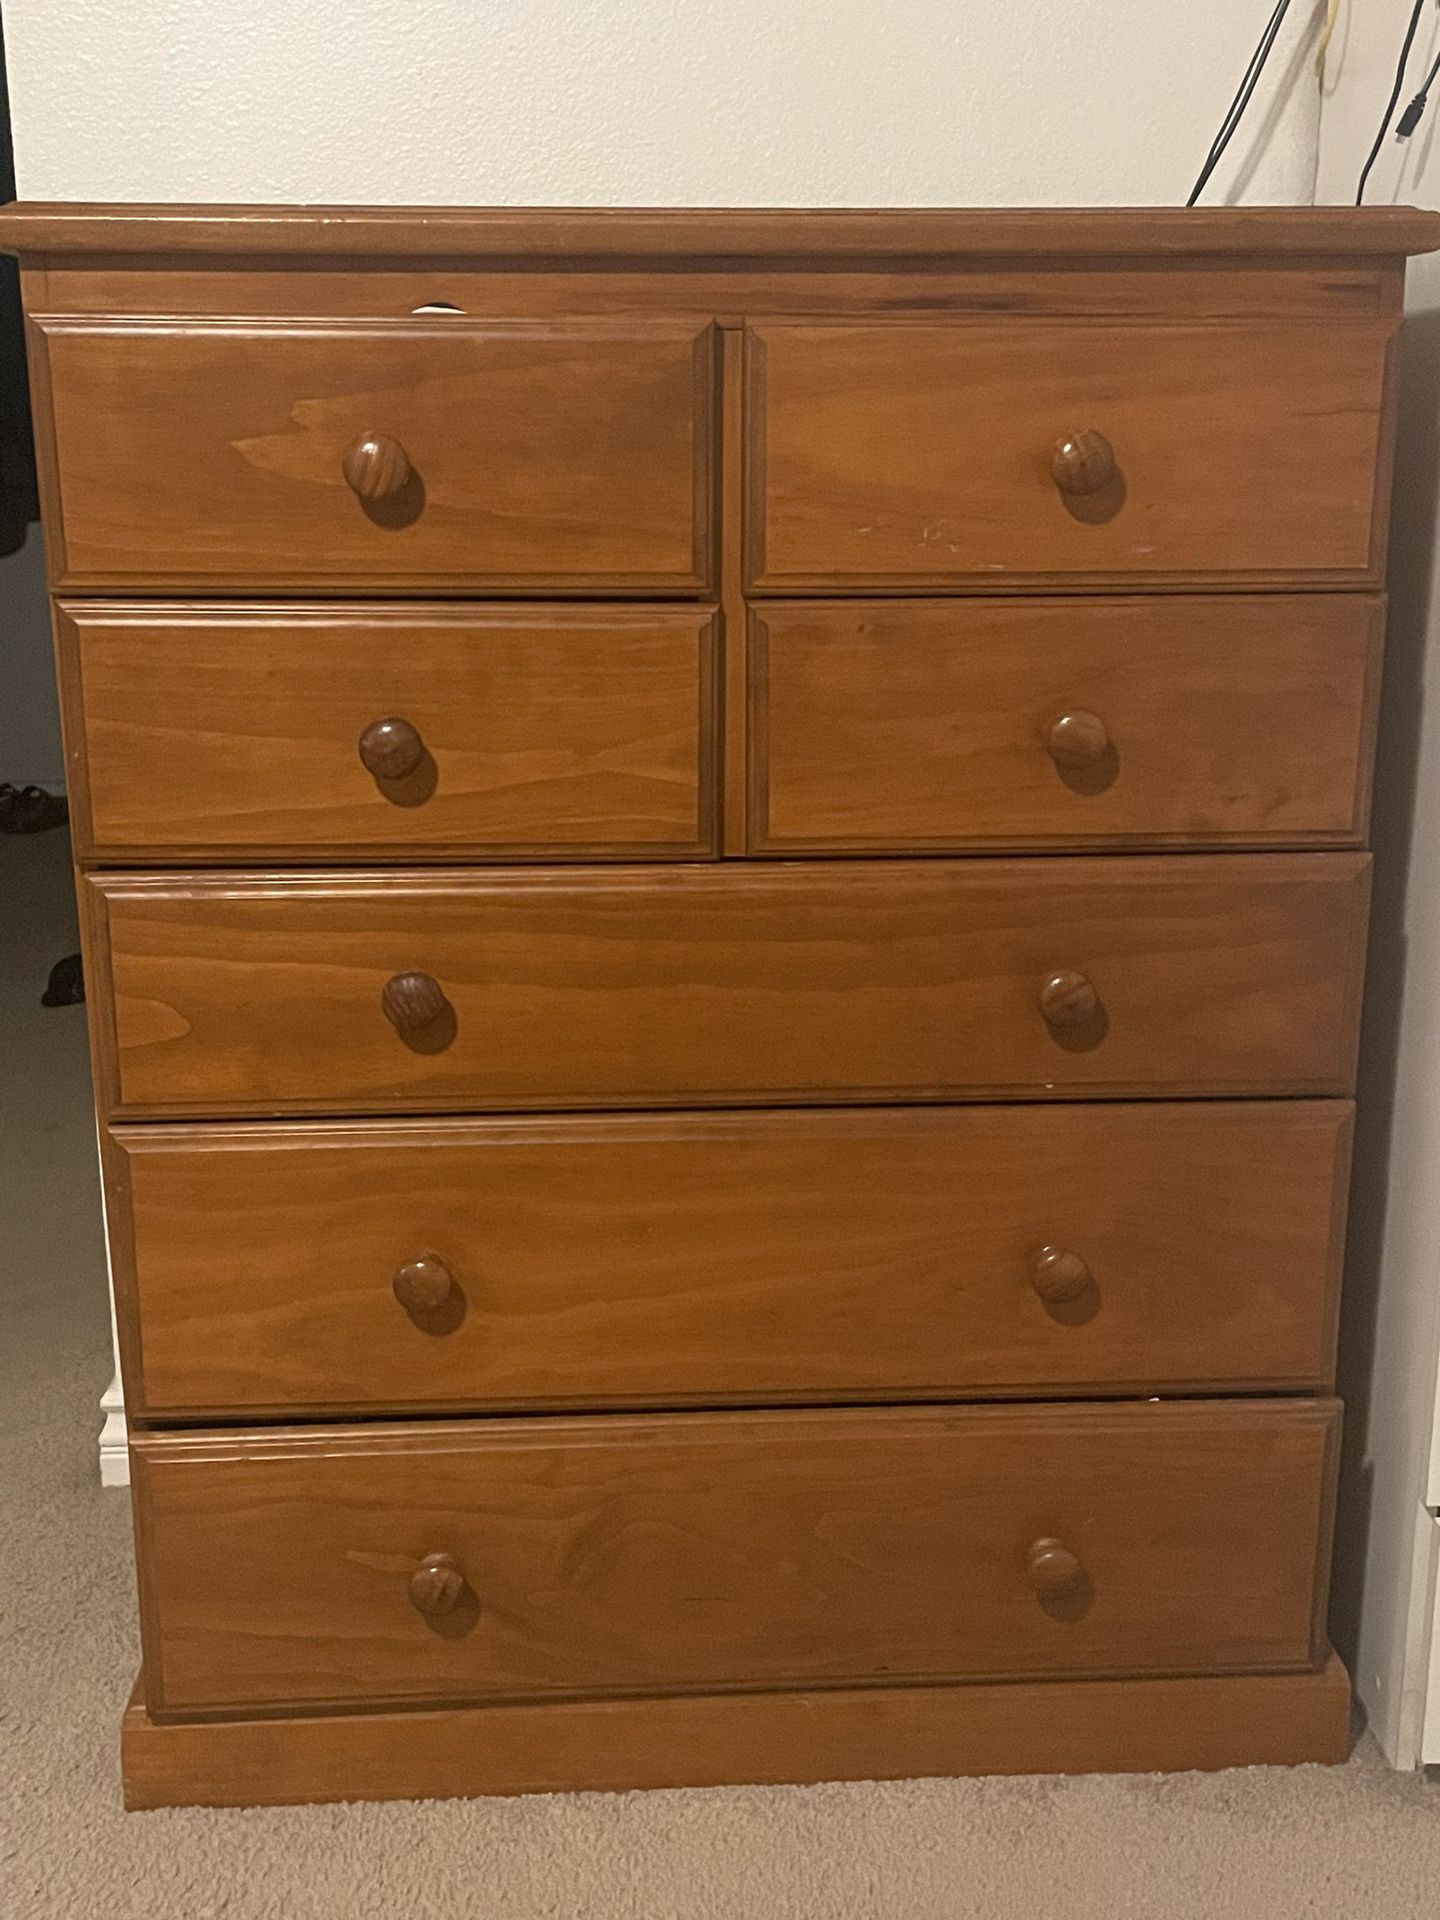 Timber Dresser With Drawers